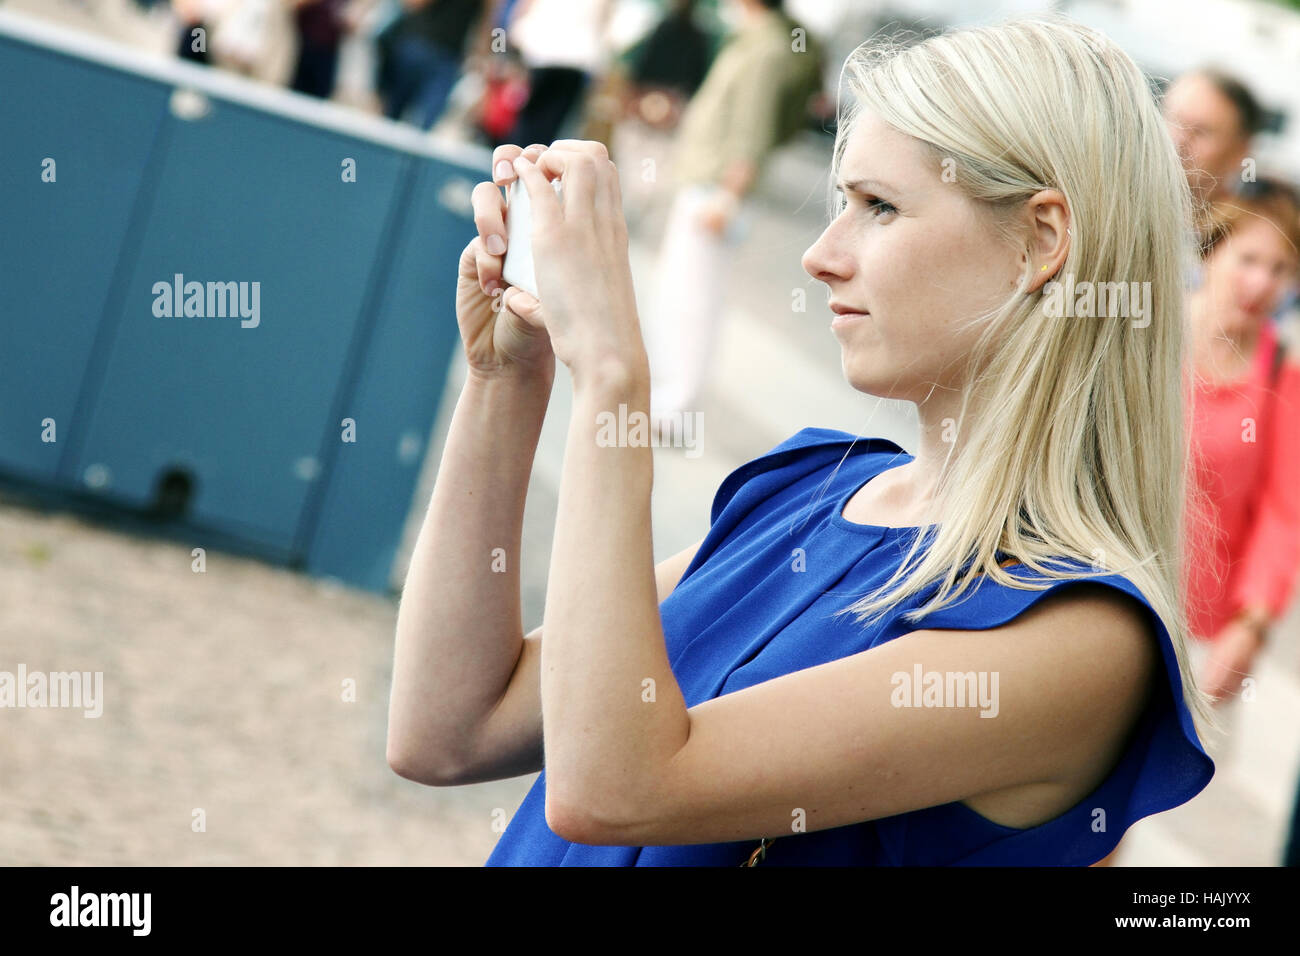 woman taking picture with mobile phone on the street Stock Photo